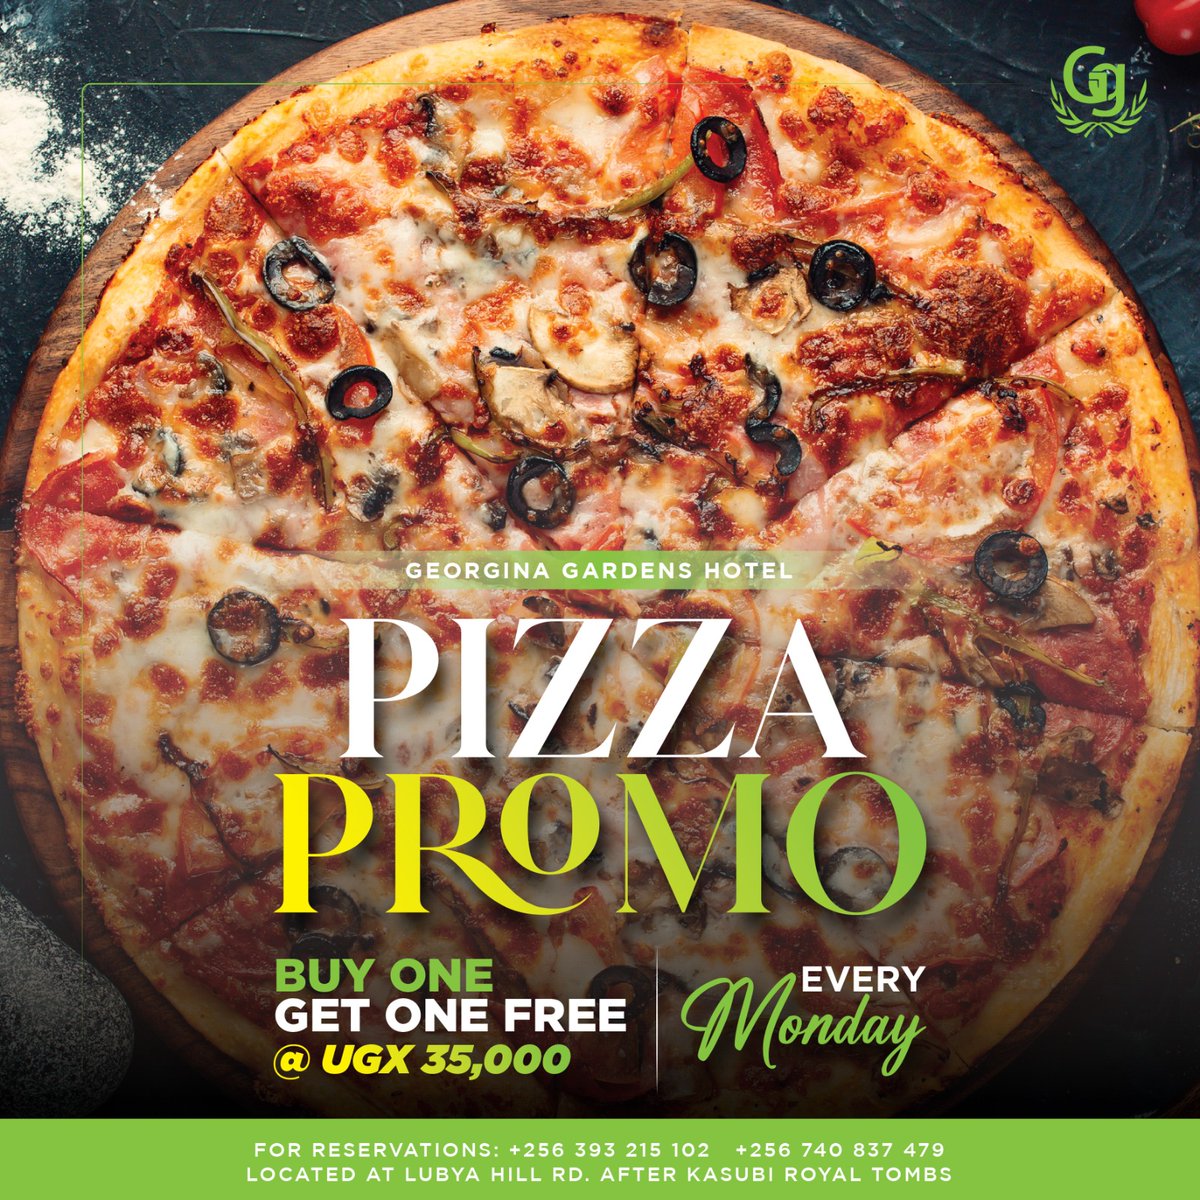 Don't miss out on delicious deals! 🍕 Buy One, Get One Free on All Pizzas! 🎉 Grab a Slice of the Action Today! #PizzaPromo #BOGO #SavorTheFlavor